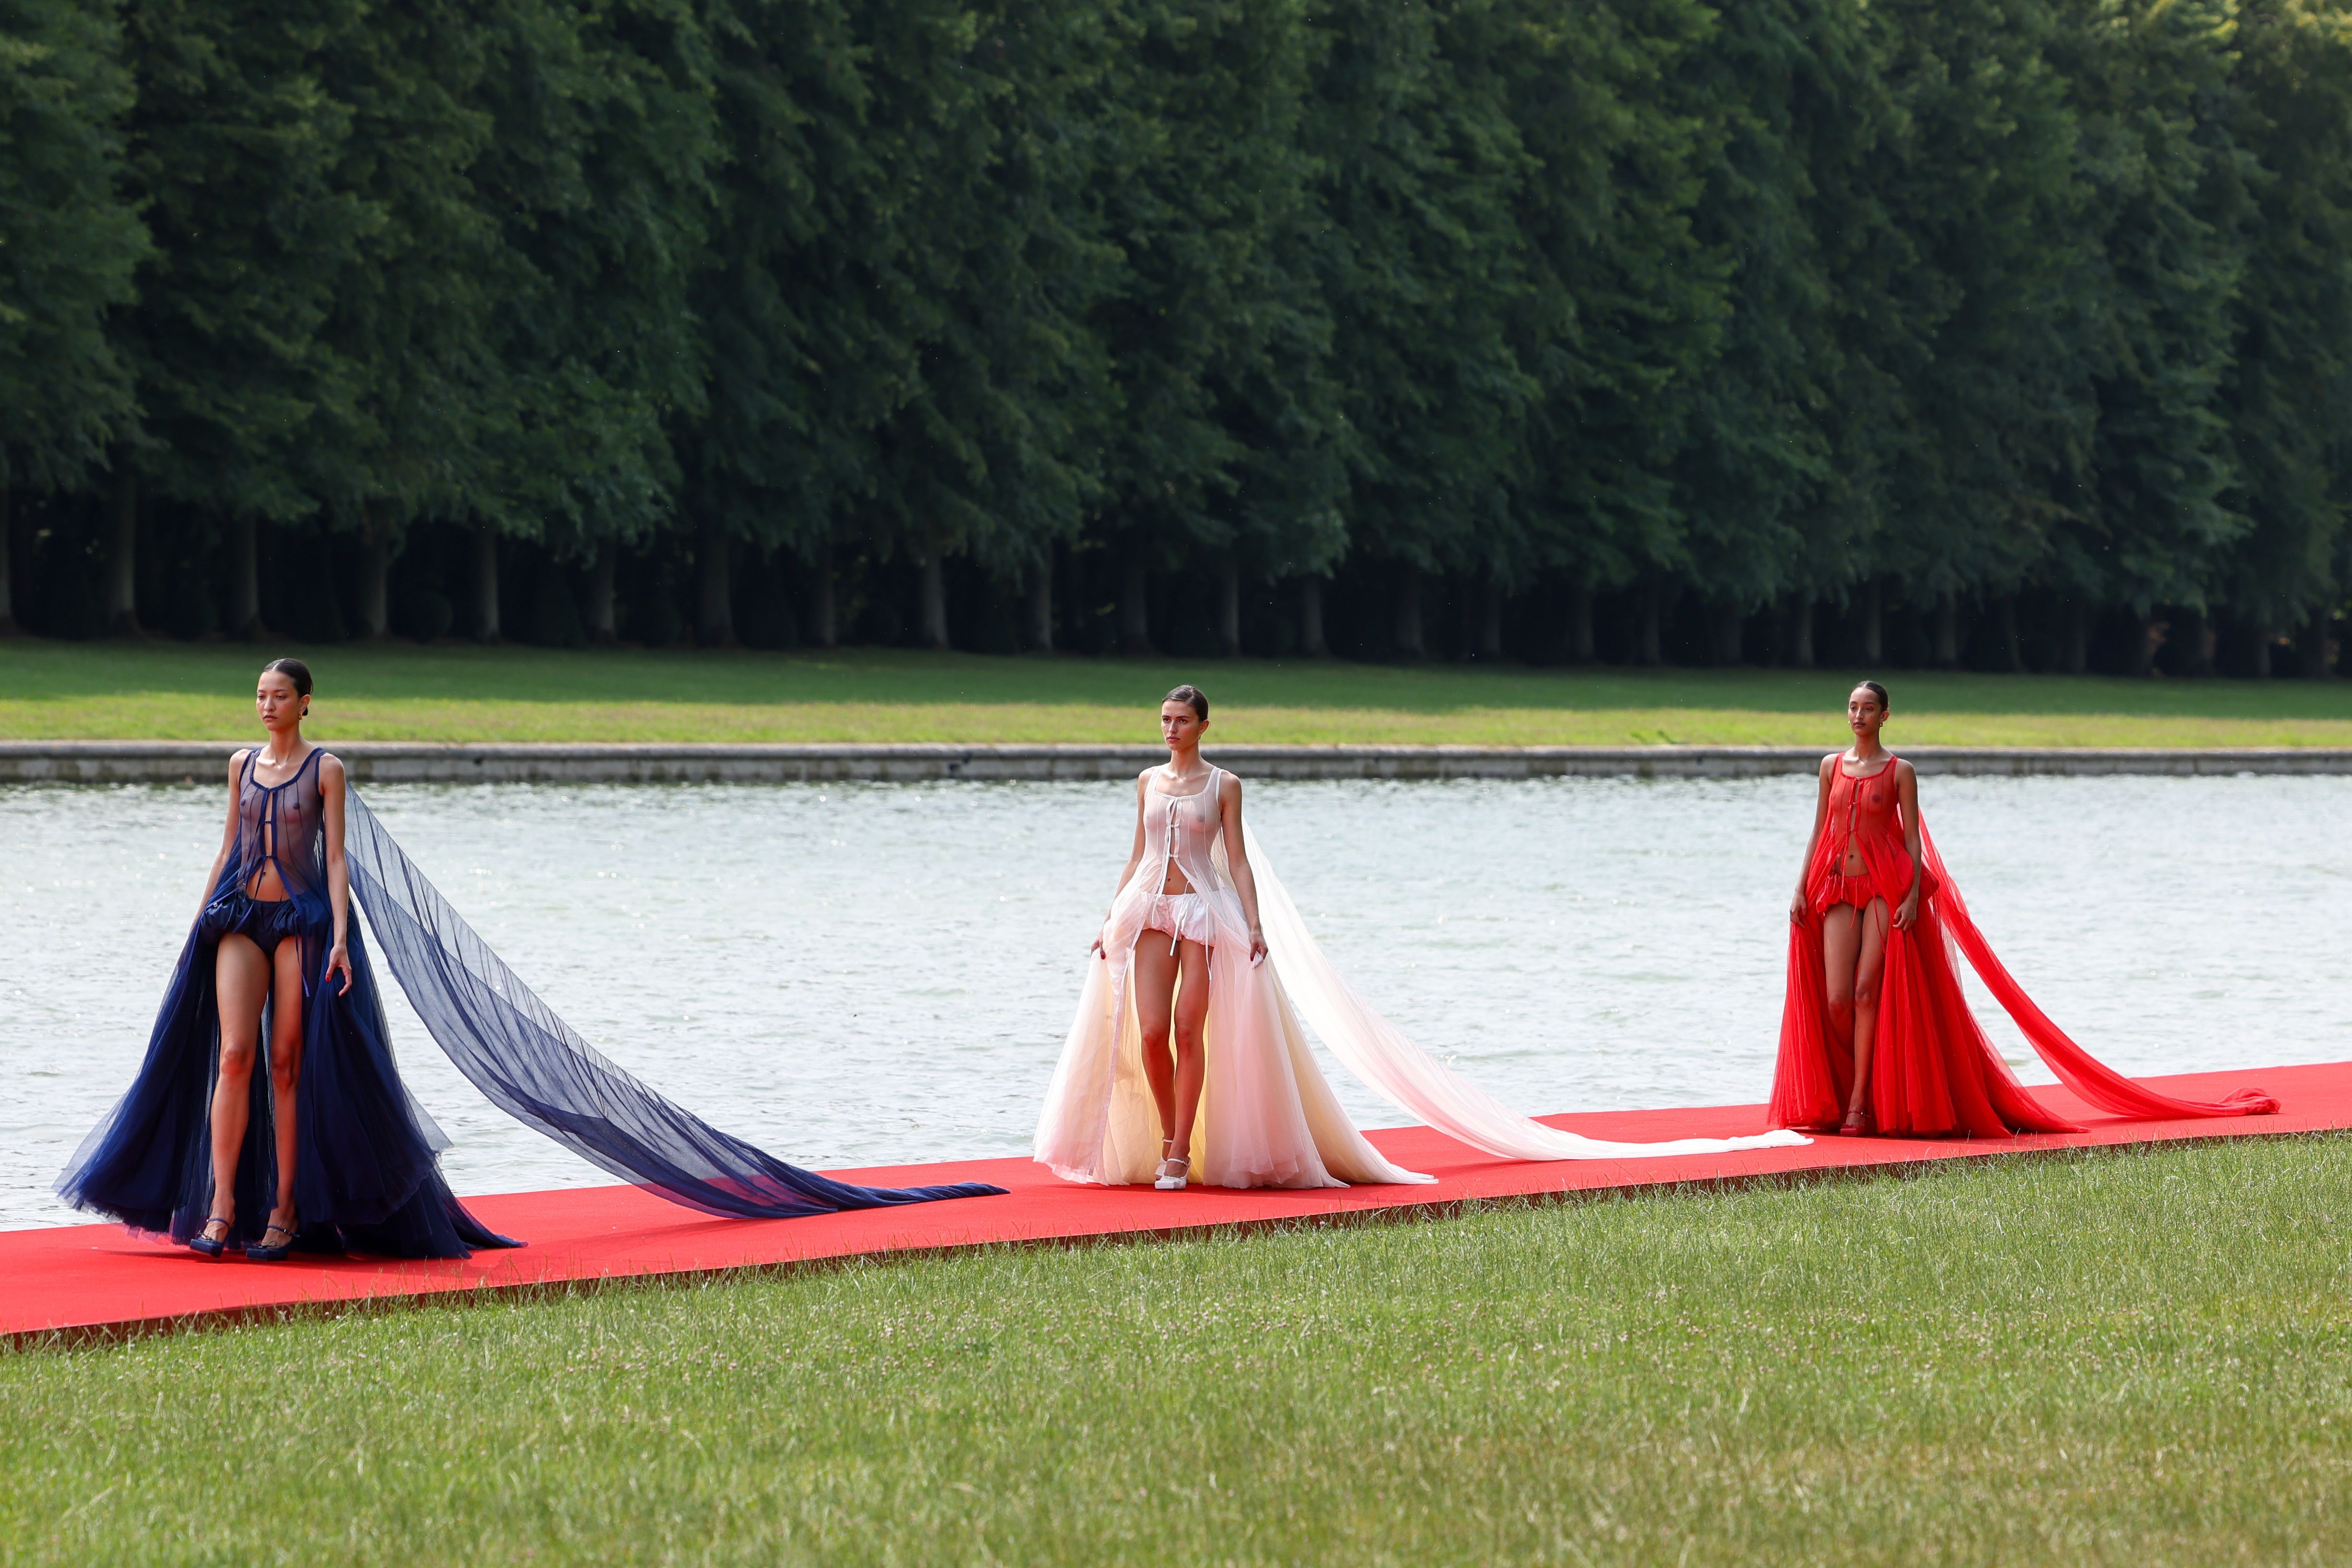 Jacquemus' Fall/Winter 2023-2024 collection at Versailles - The